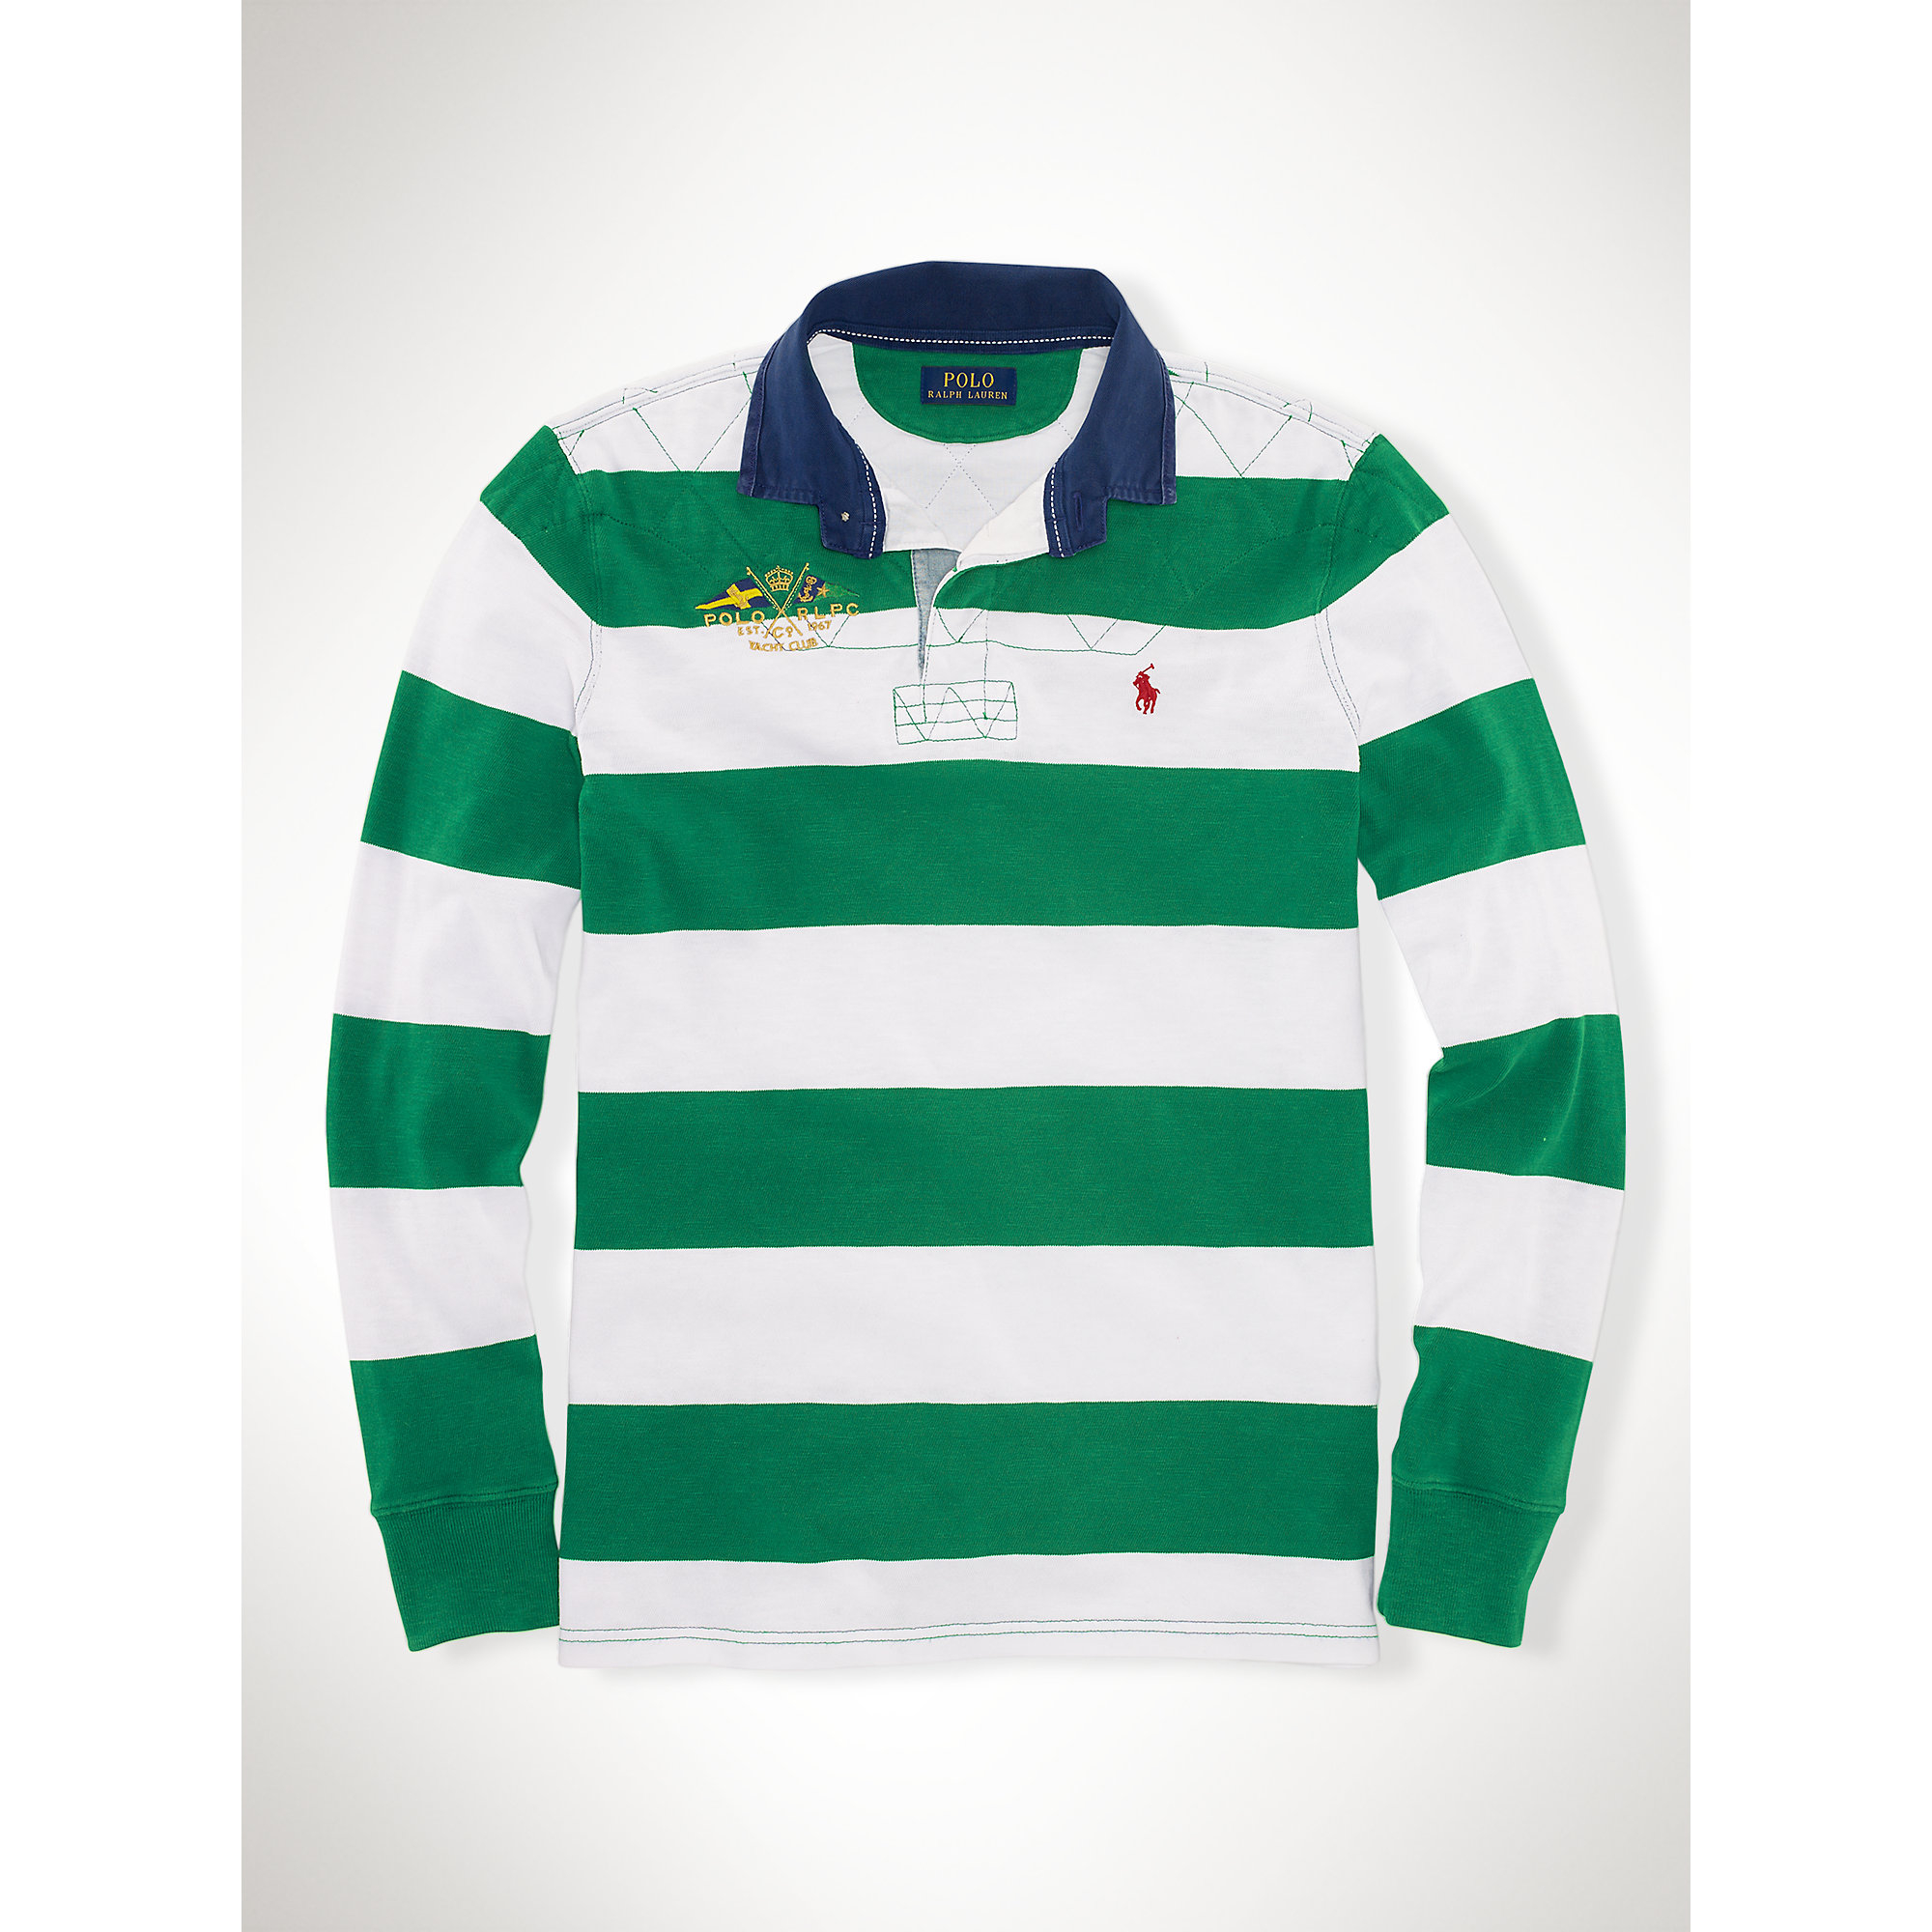 Lyst - Polo Ralph Lauren Custom-fit Striped Rugby Shirt in Green for Men